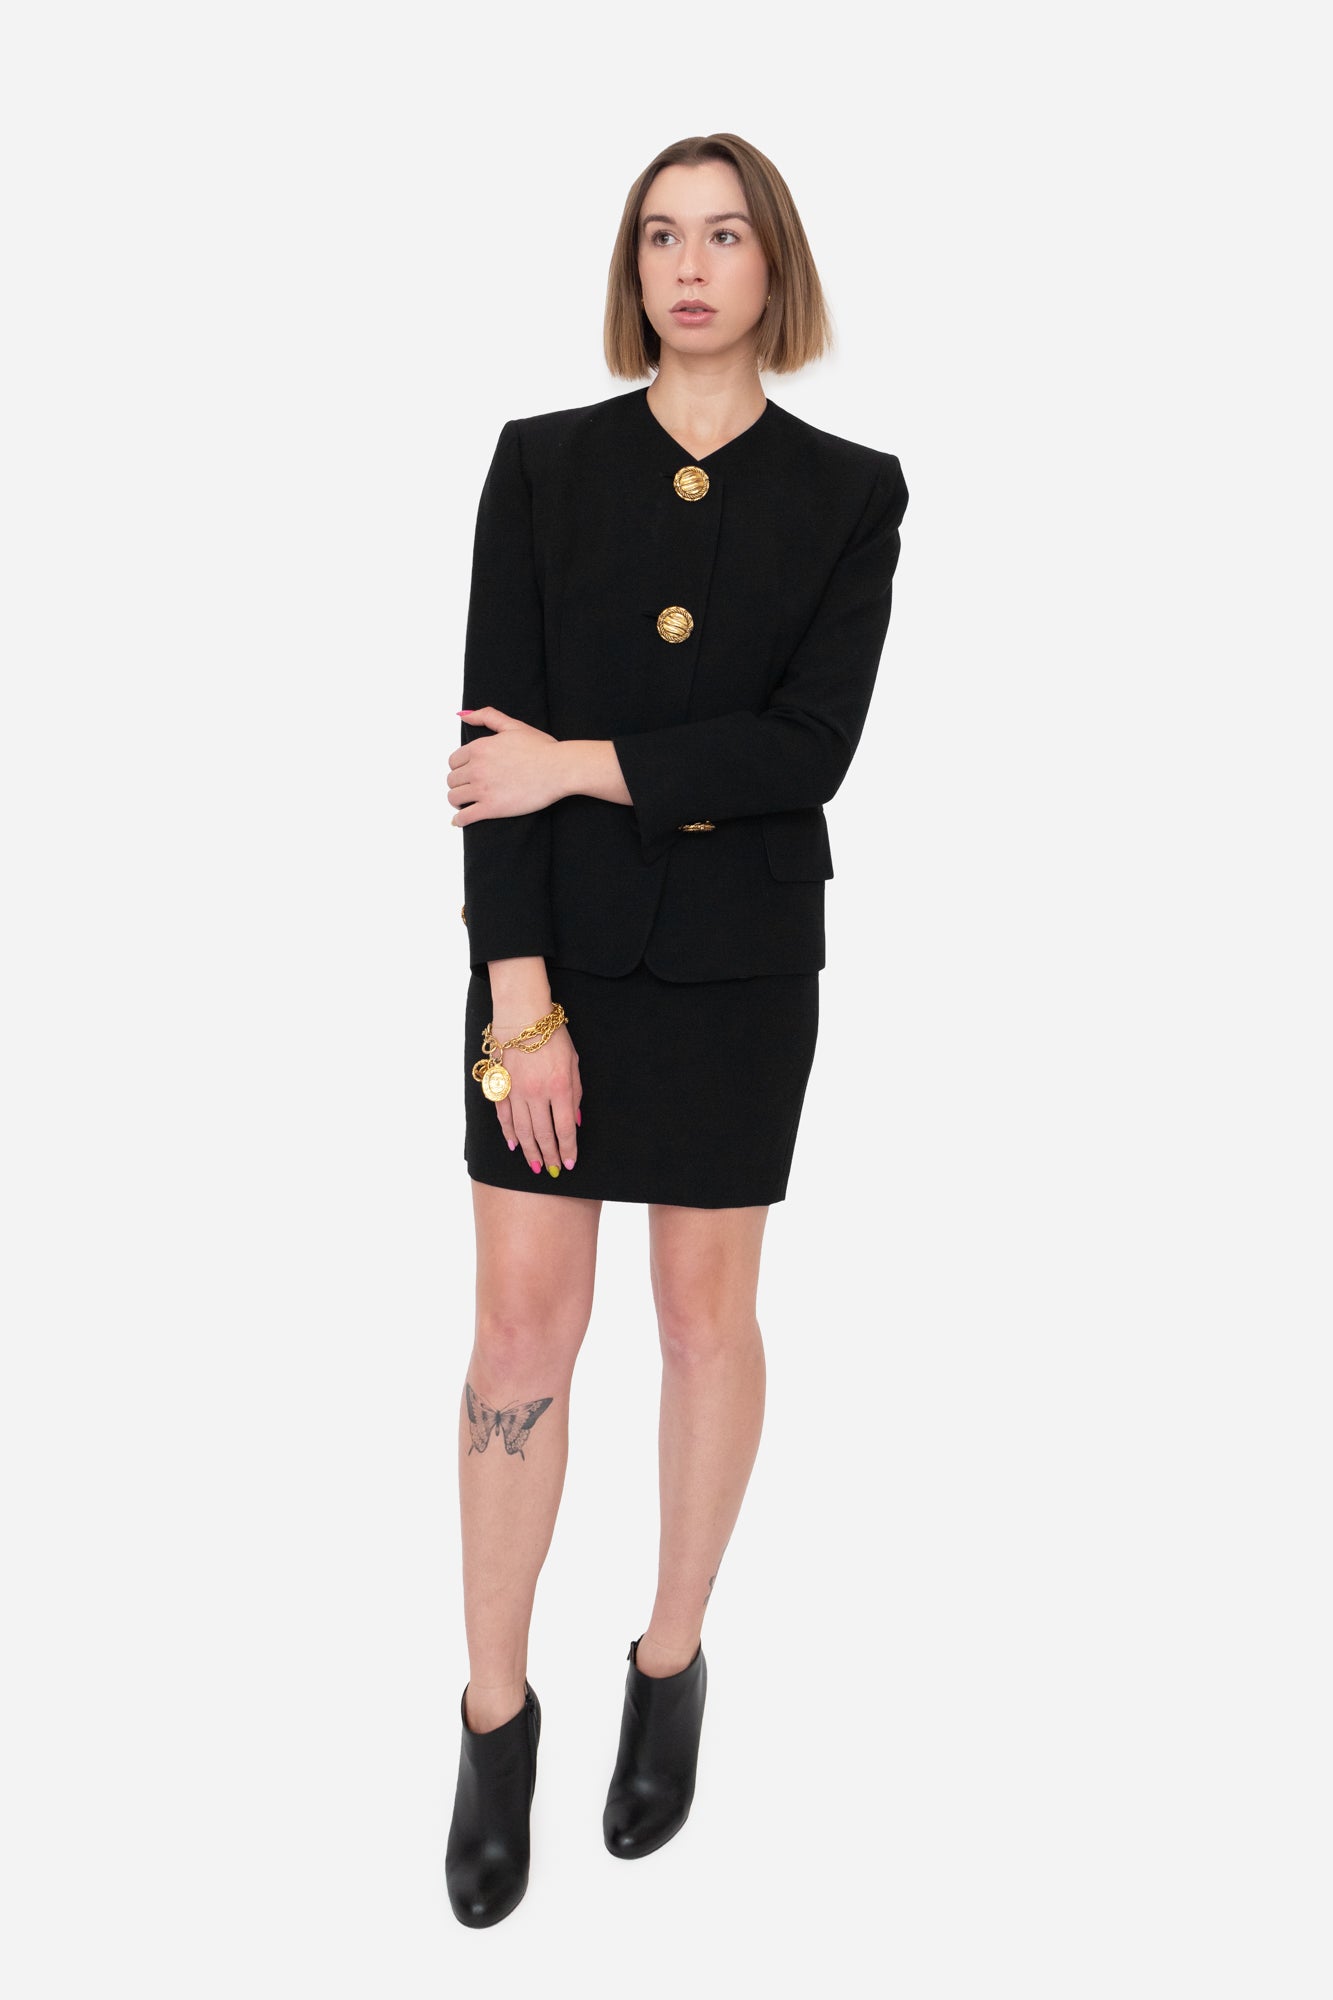 Vintage Black Skirt Suit with Gold Buttons